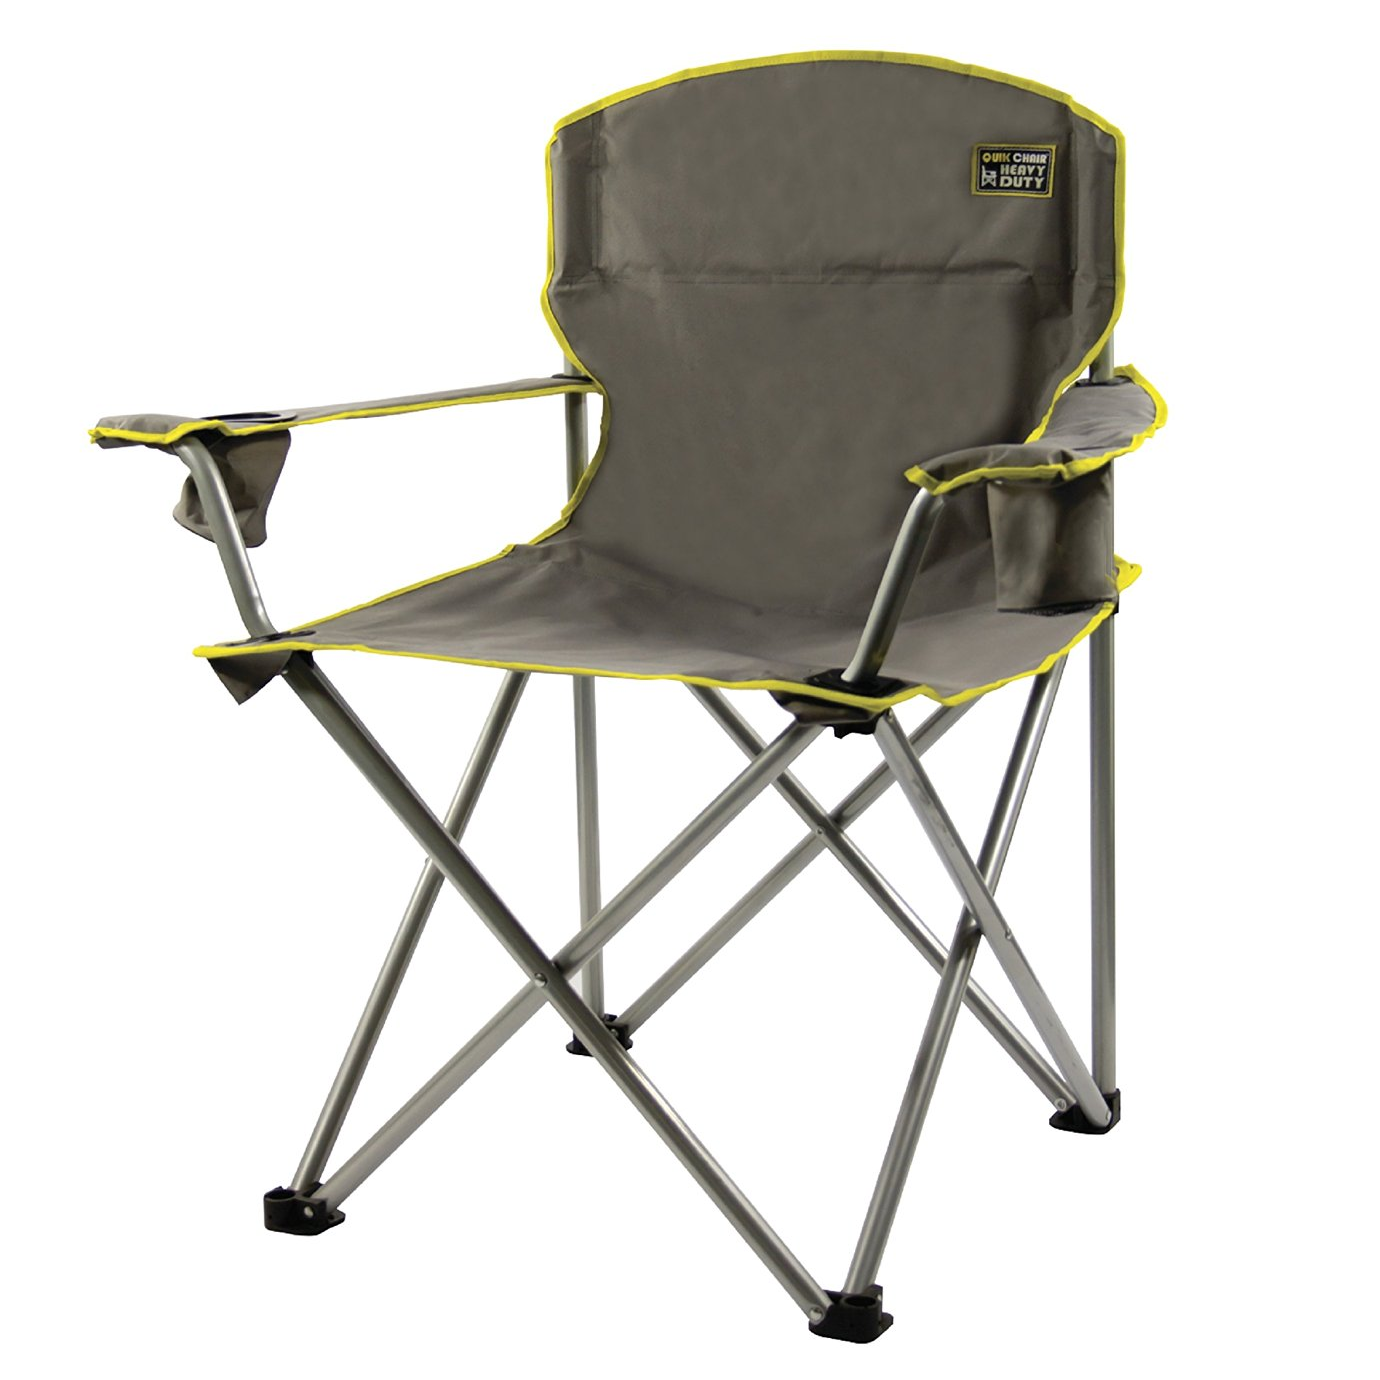 Quik Chair Heavy Duty Folding Camp Chair Only $12.07 on Amazon!